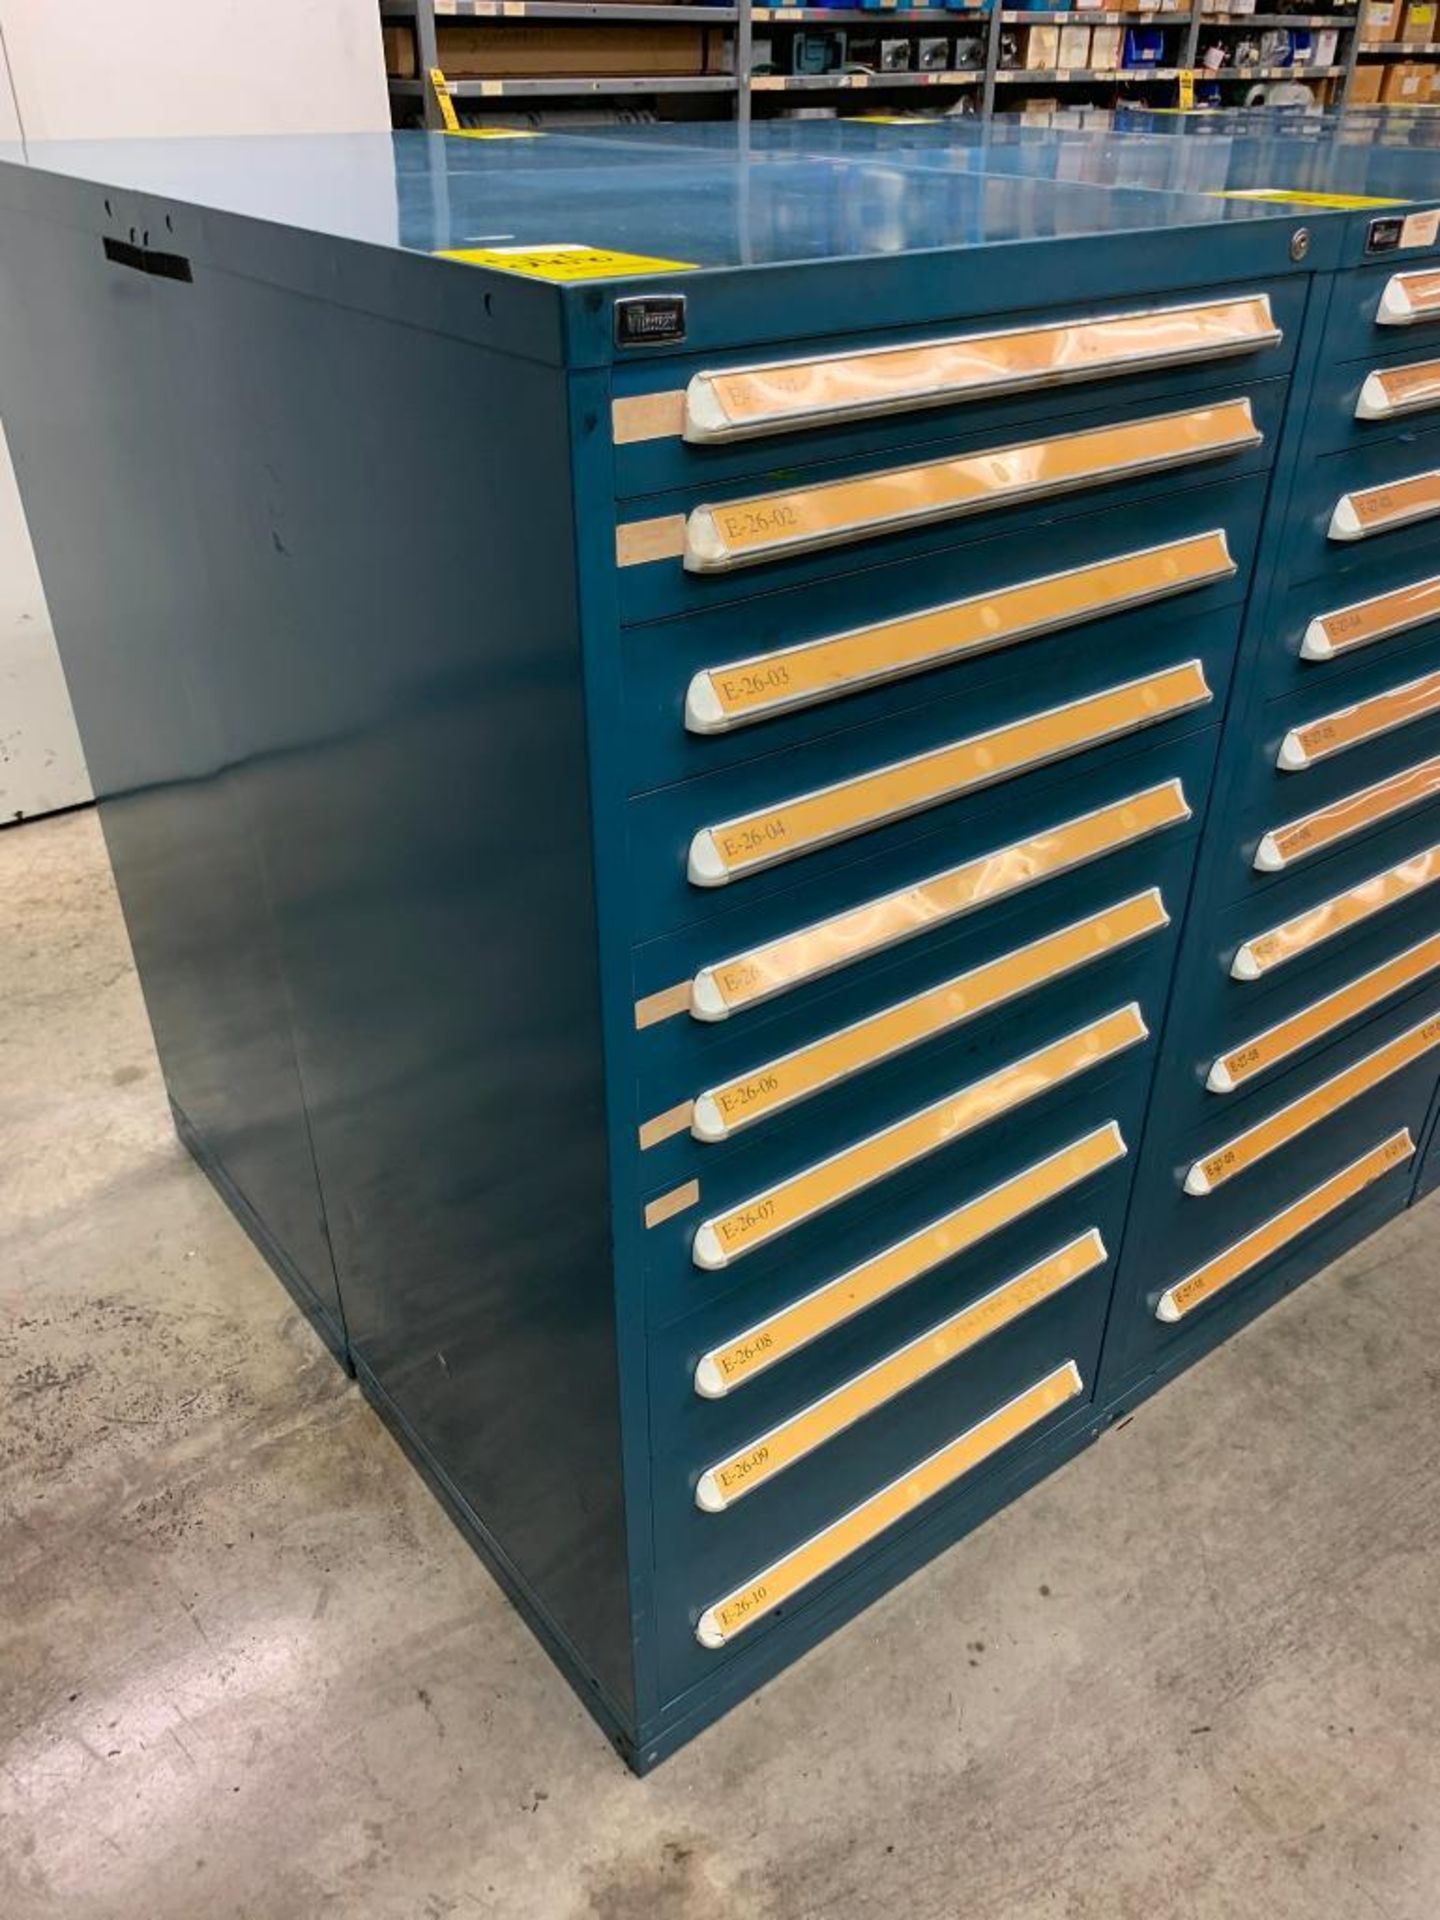 Vidmar 10-Drawer Cabinet w/ Clamps, Chain Links, Snap-In Blanks, Conduit Connectors, Couplings - Image 2 of 14